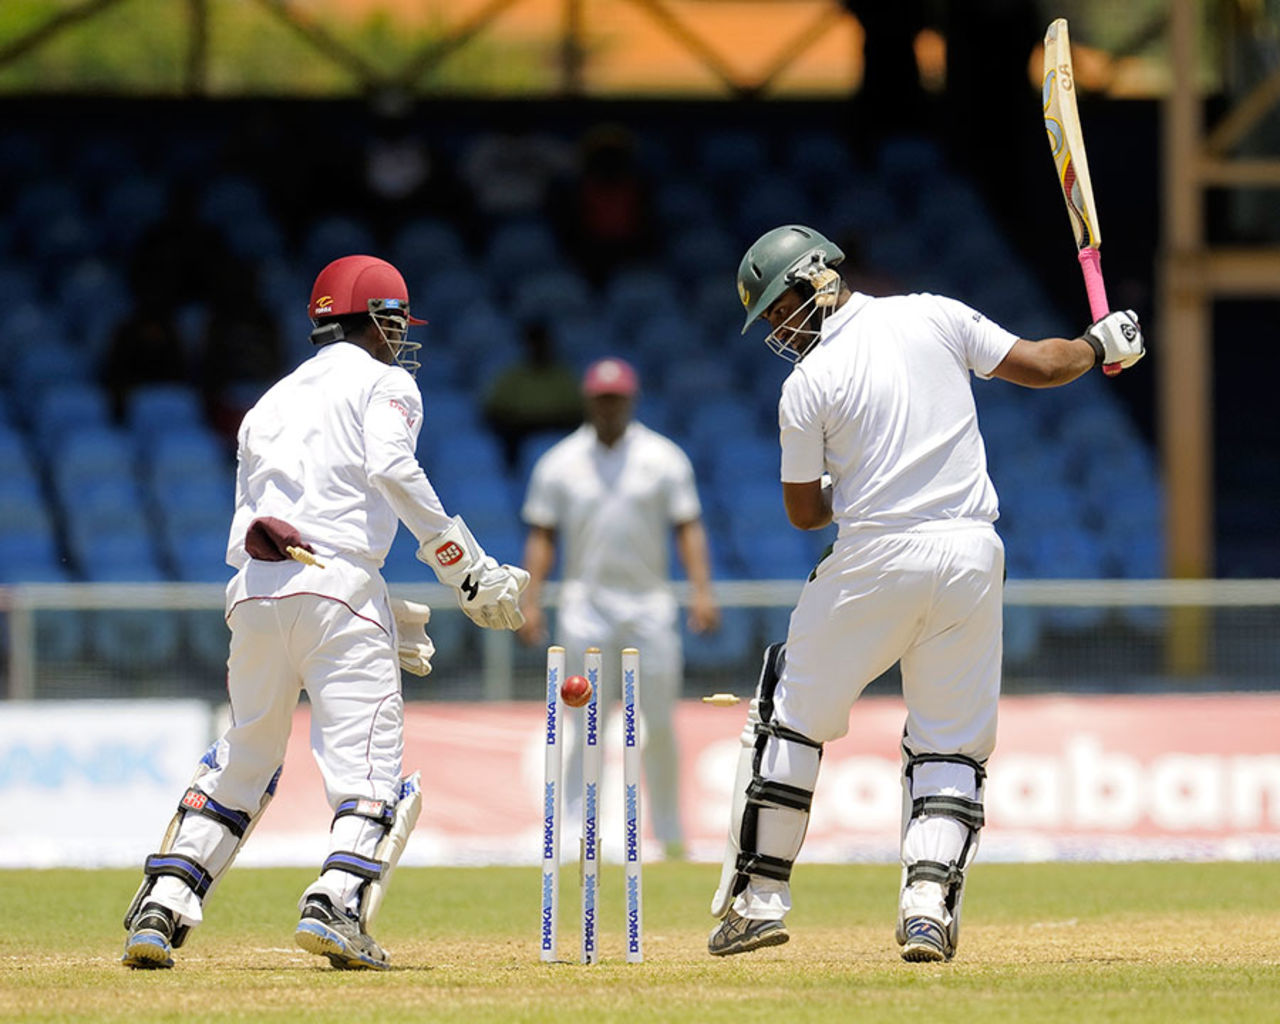 Tamim Iqbal looks back as Sulieman Benn turns one sharply to disturb his stumps, West Indies v Bangladesh, 1st Test, St. Vincent, 4th day, September 8, 2014